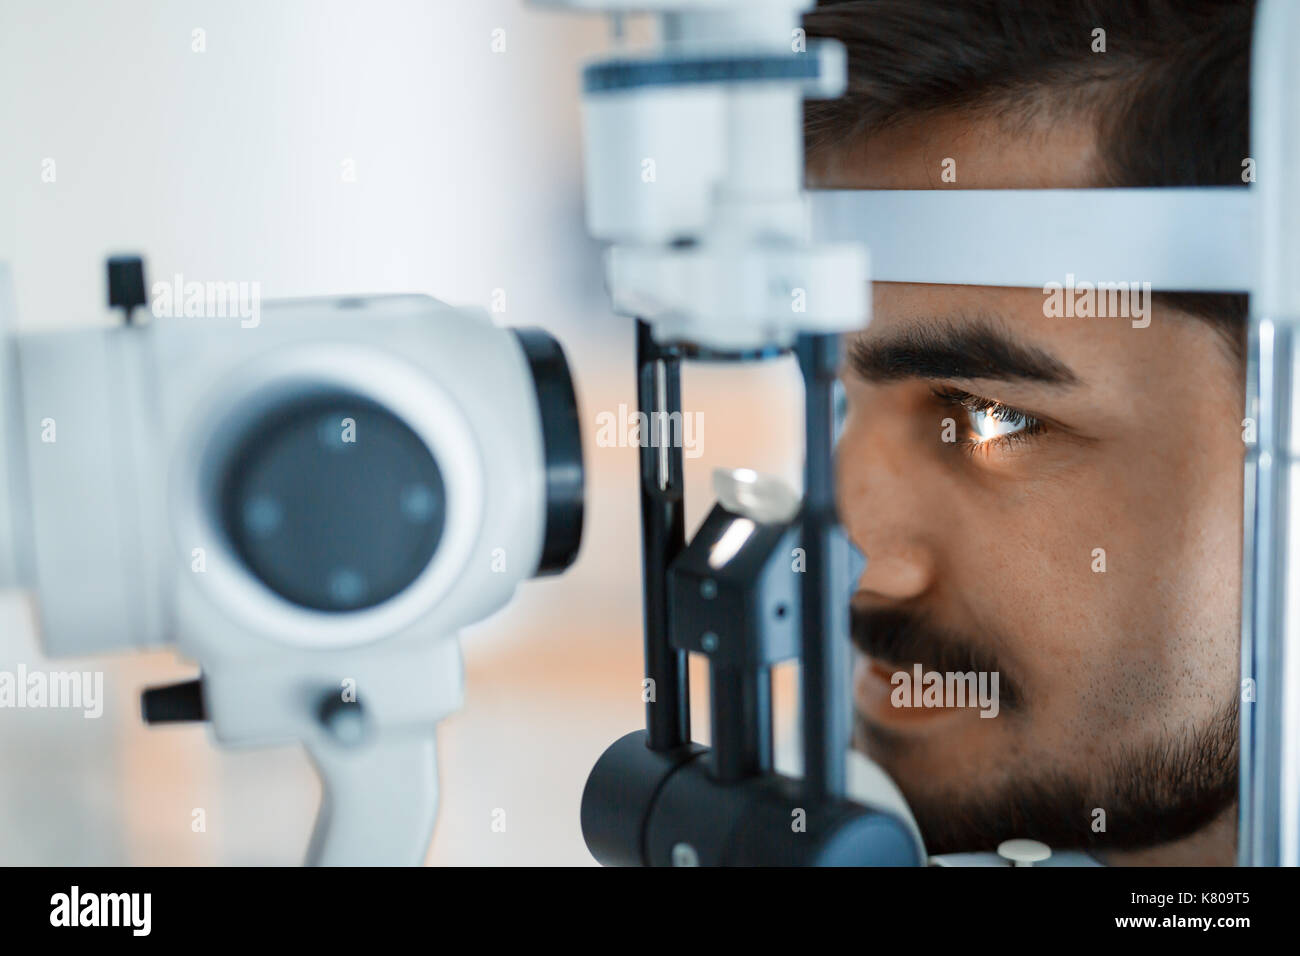 Patient or customer at slit lamp at optometrist or optician Stock Photo